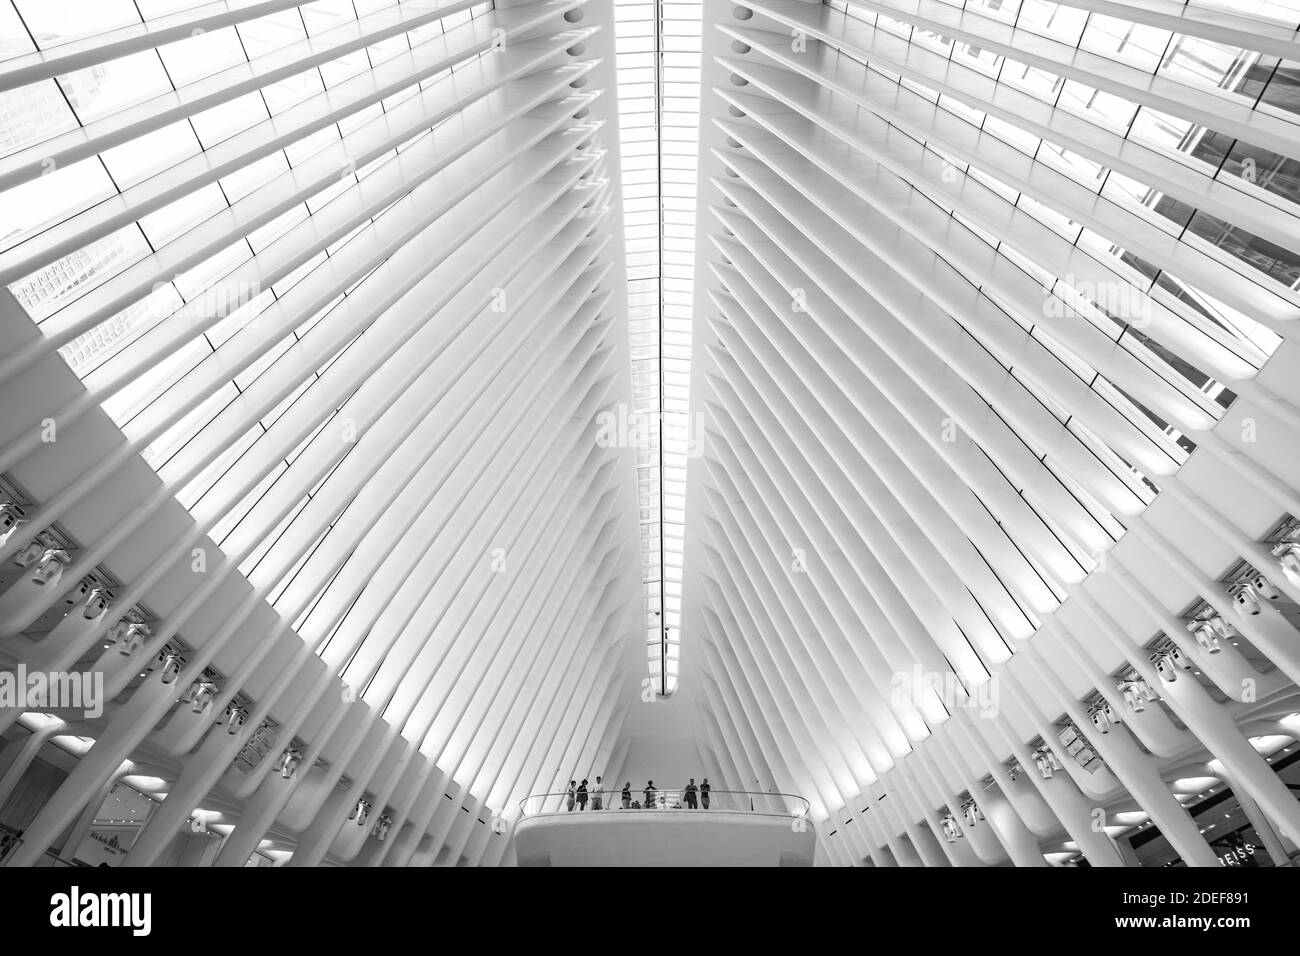 Abstract of the Oculus, World Trade Center, New York Stock Photo